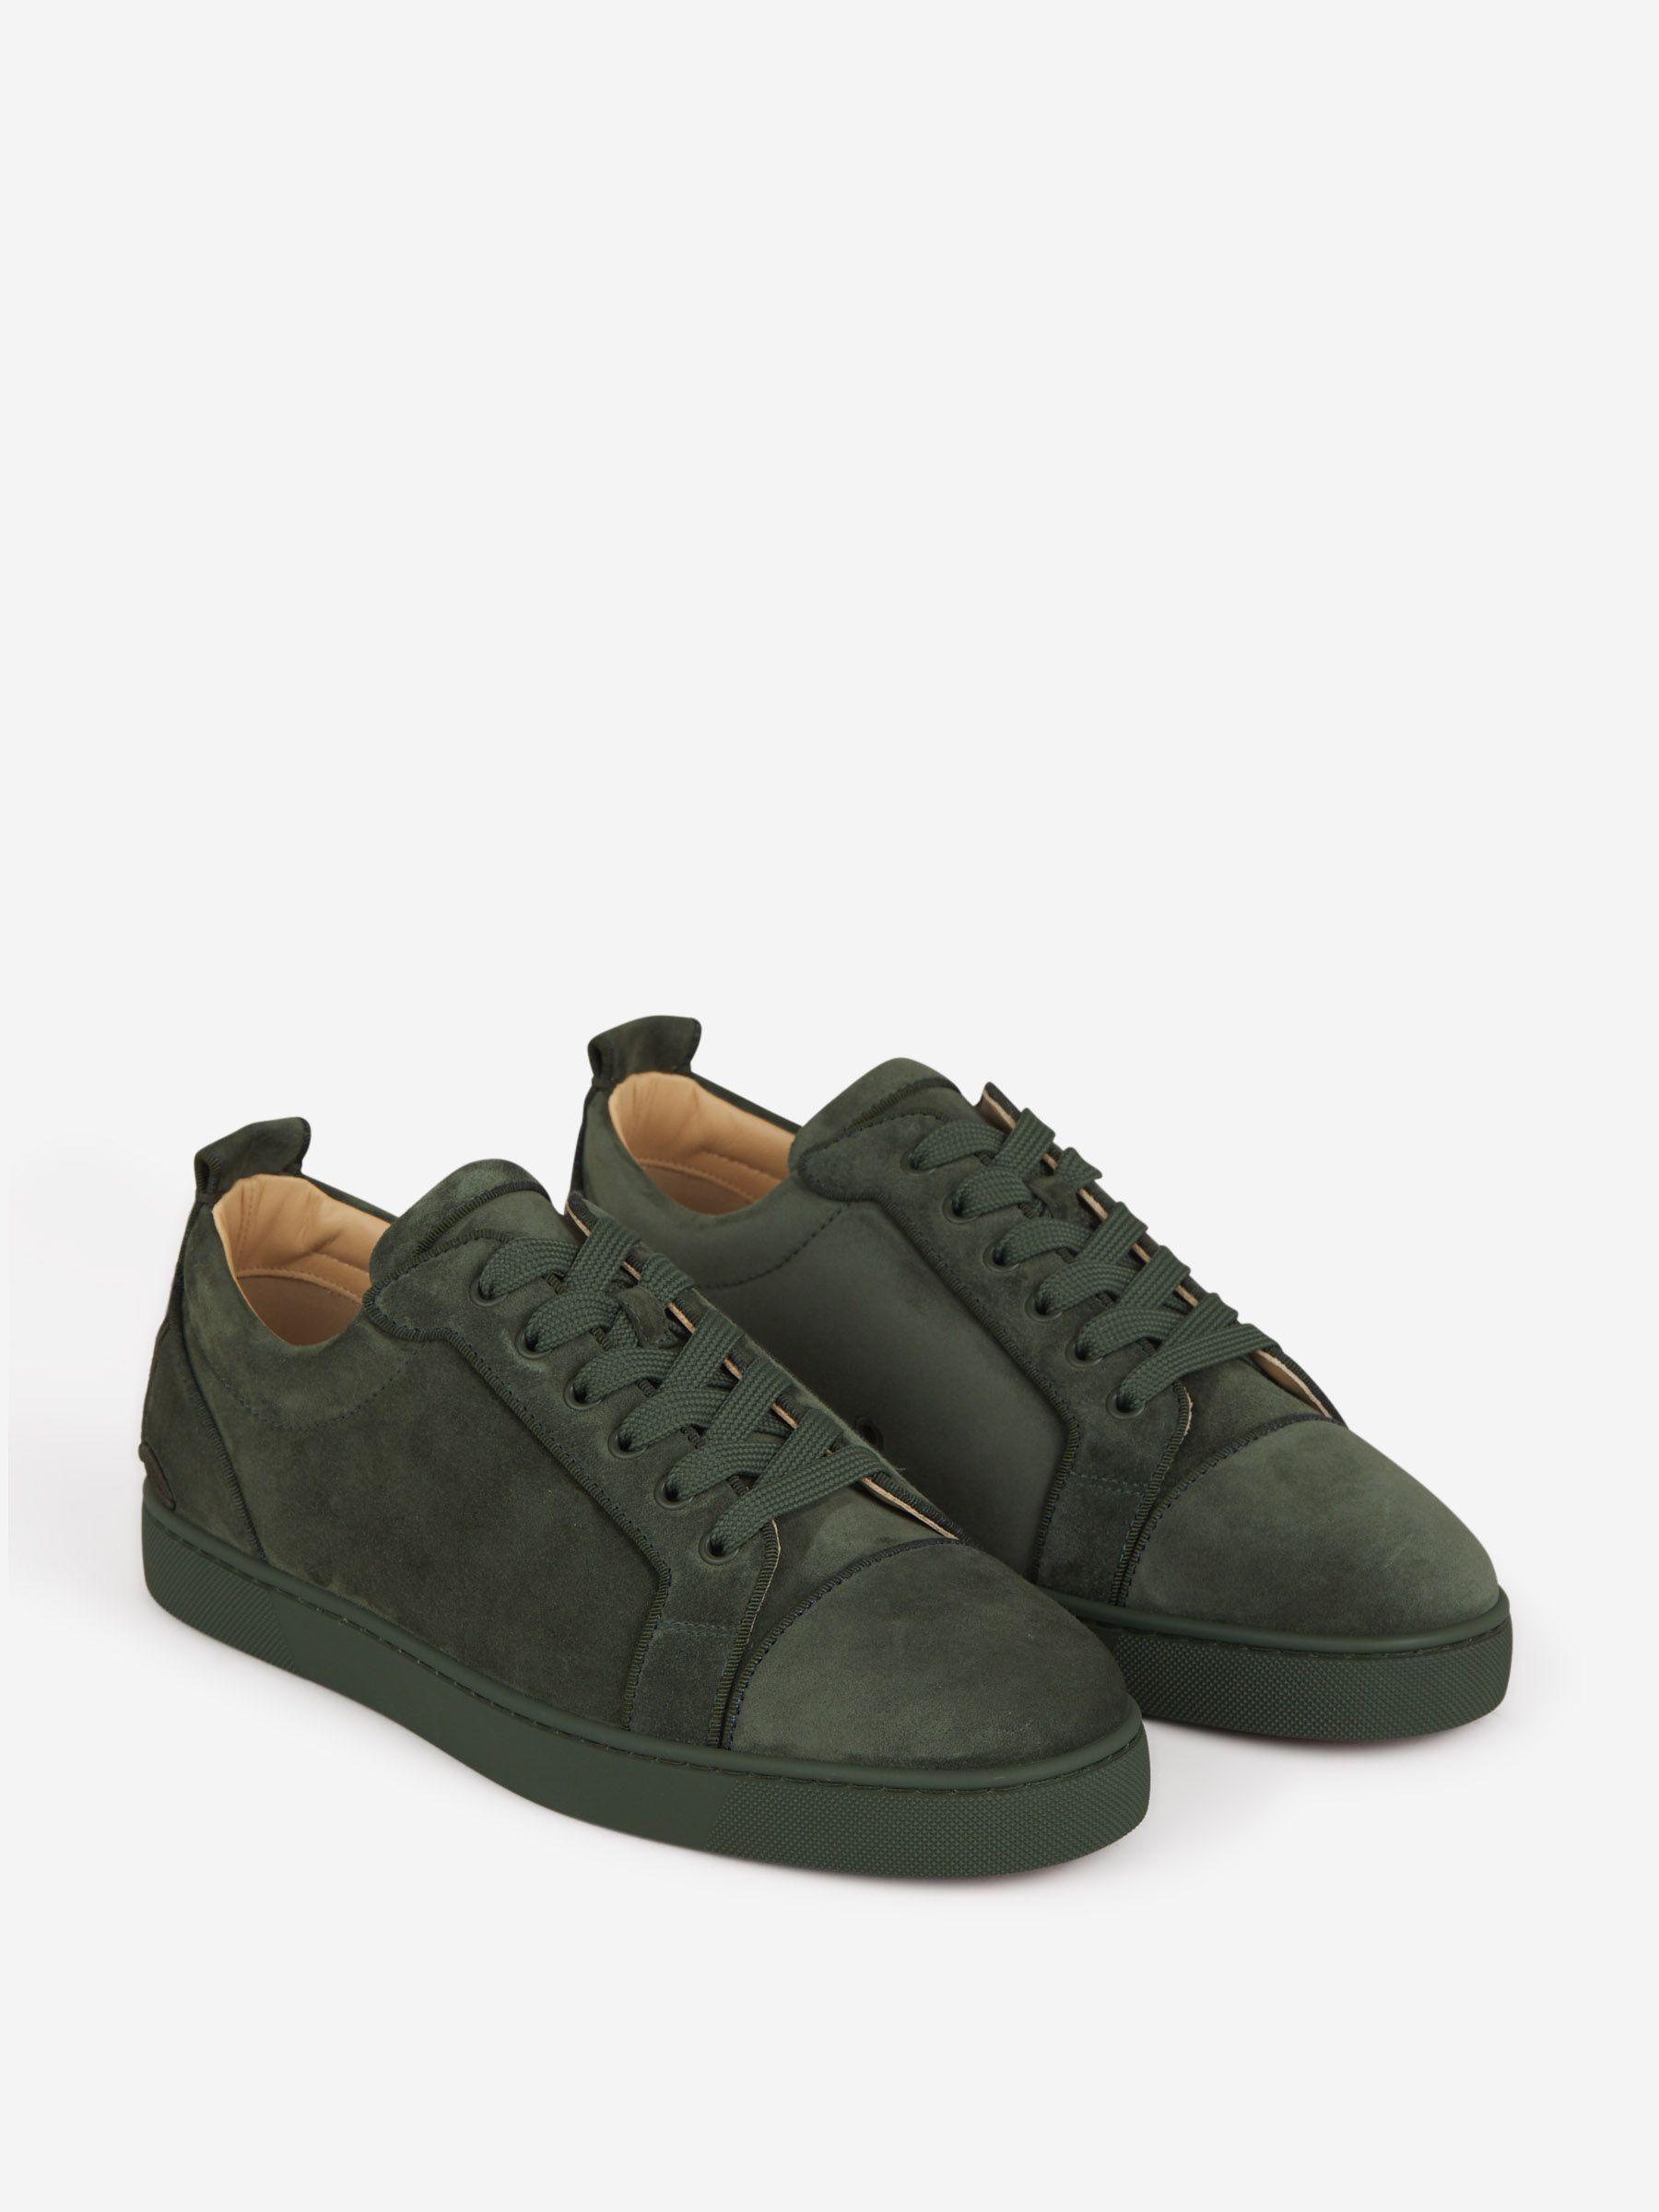 Christian Louboutin Fun Louis Junior Leather Sneakers | Size - UK 5 - by MyTheresa